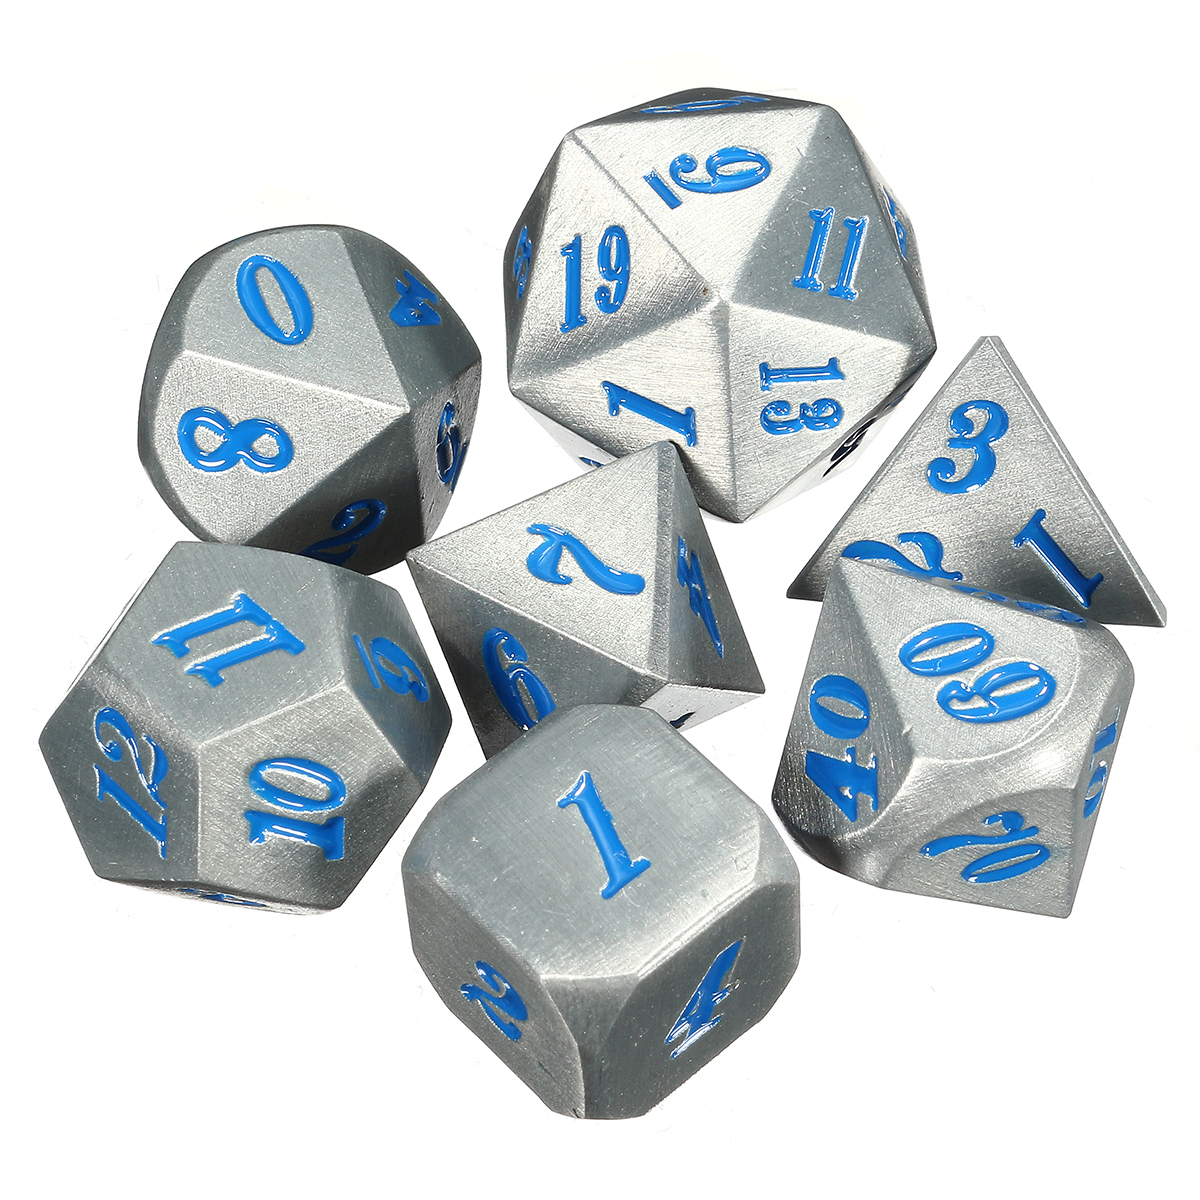 7Pc-Solid-Metal-Heavy-Dice-Set-Polyhedral-Dices-Role-Playing-Games-Dice-Gadget-RPG-1391316-8